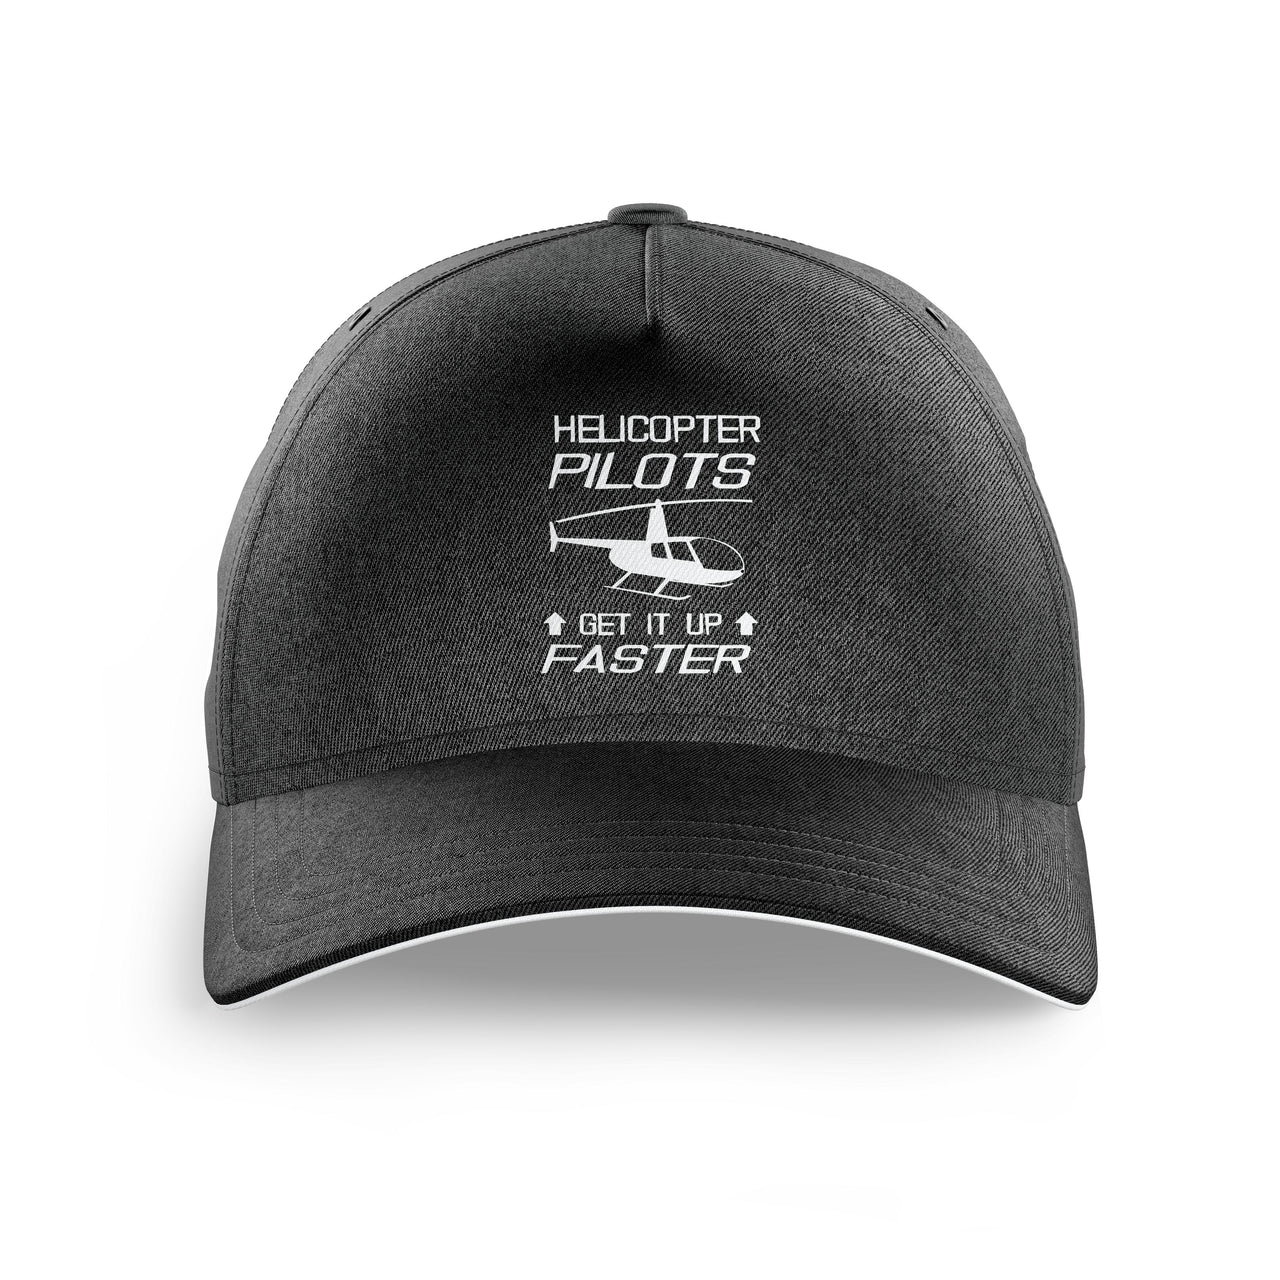 Helicopter Pilots Get It Up Faster Printed Hats